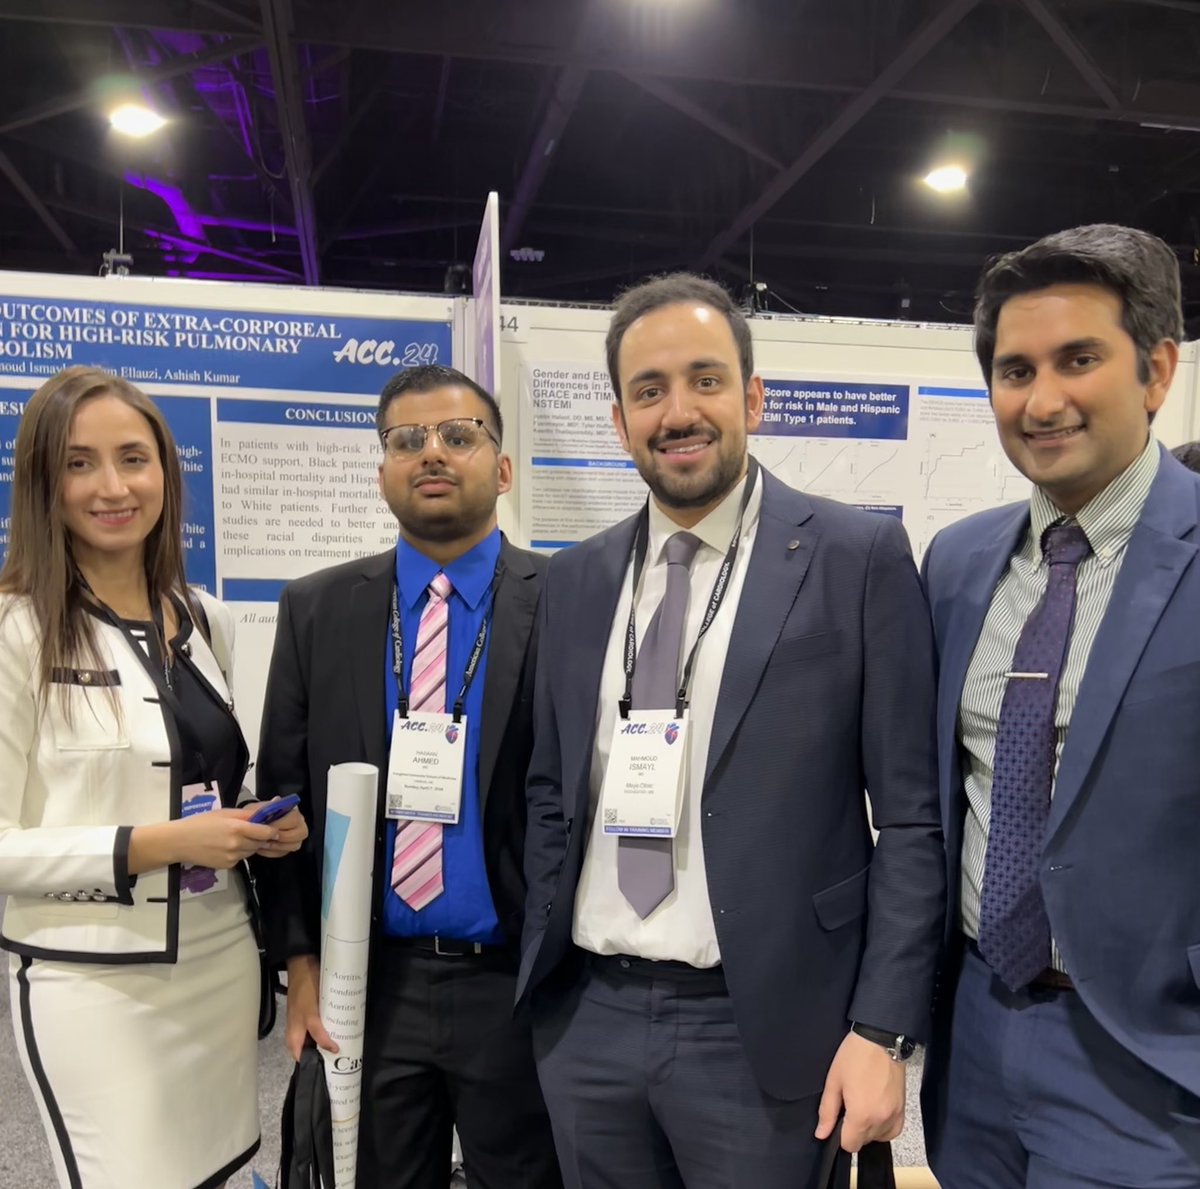 Had a great time at #ACC24, from participating in the #ACCFIT jeopardy competition and presenting 2 moderated oral presentations to connecting with mentors and meeting old friends! Thank you @ACCinTouch @MayoClinicCV @MayoCVFellows